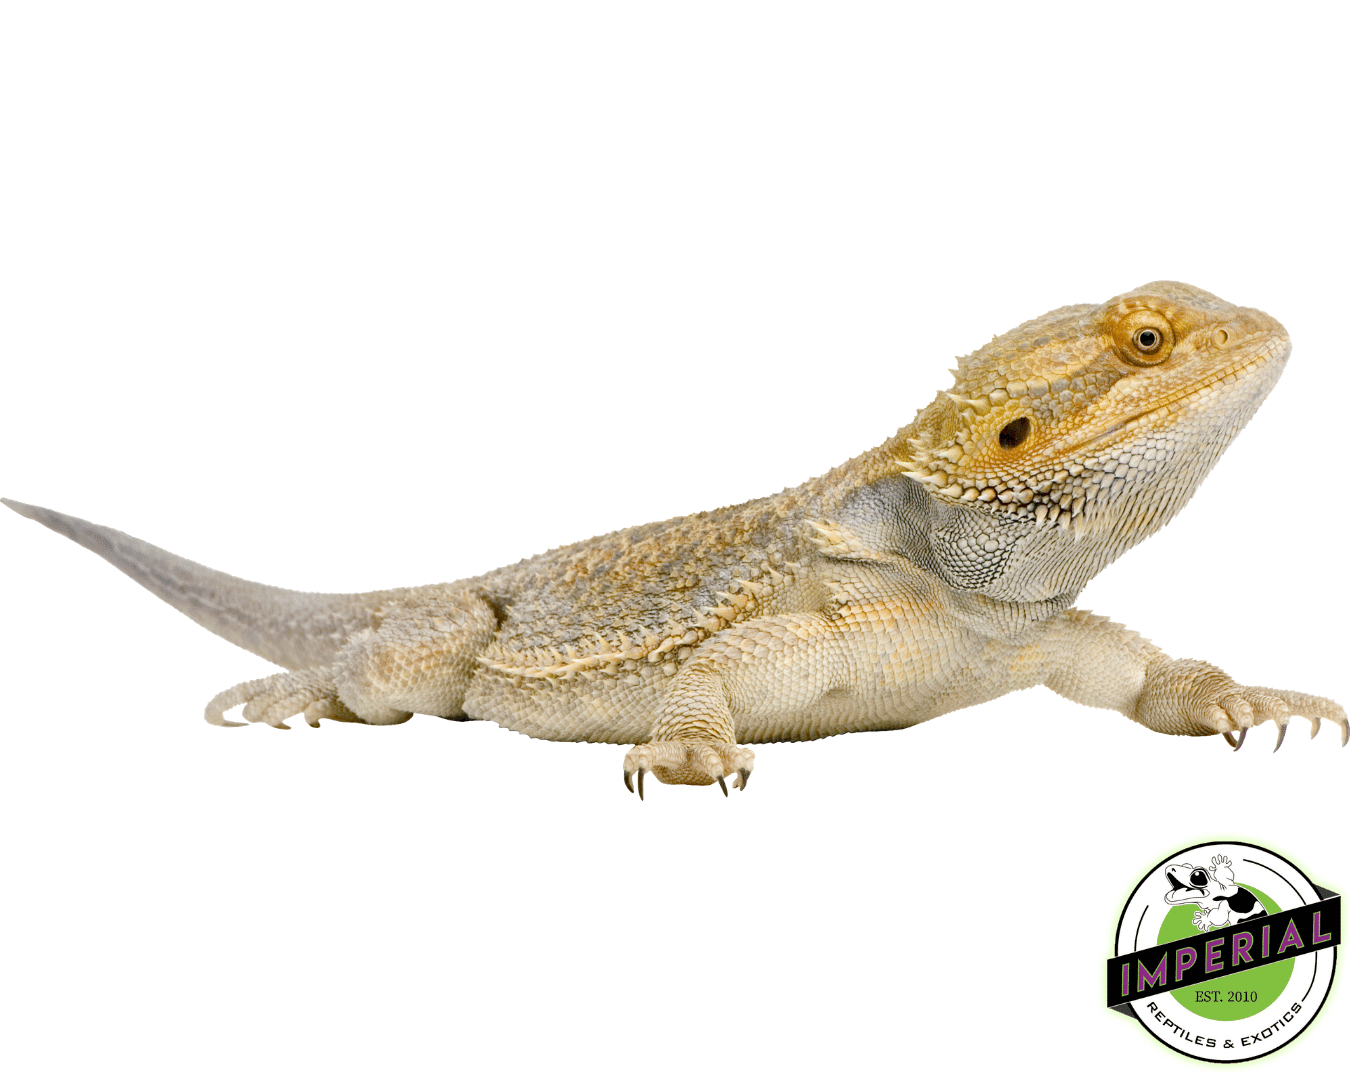 adult bearded dragon for sale, buy reptiles online